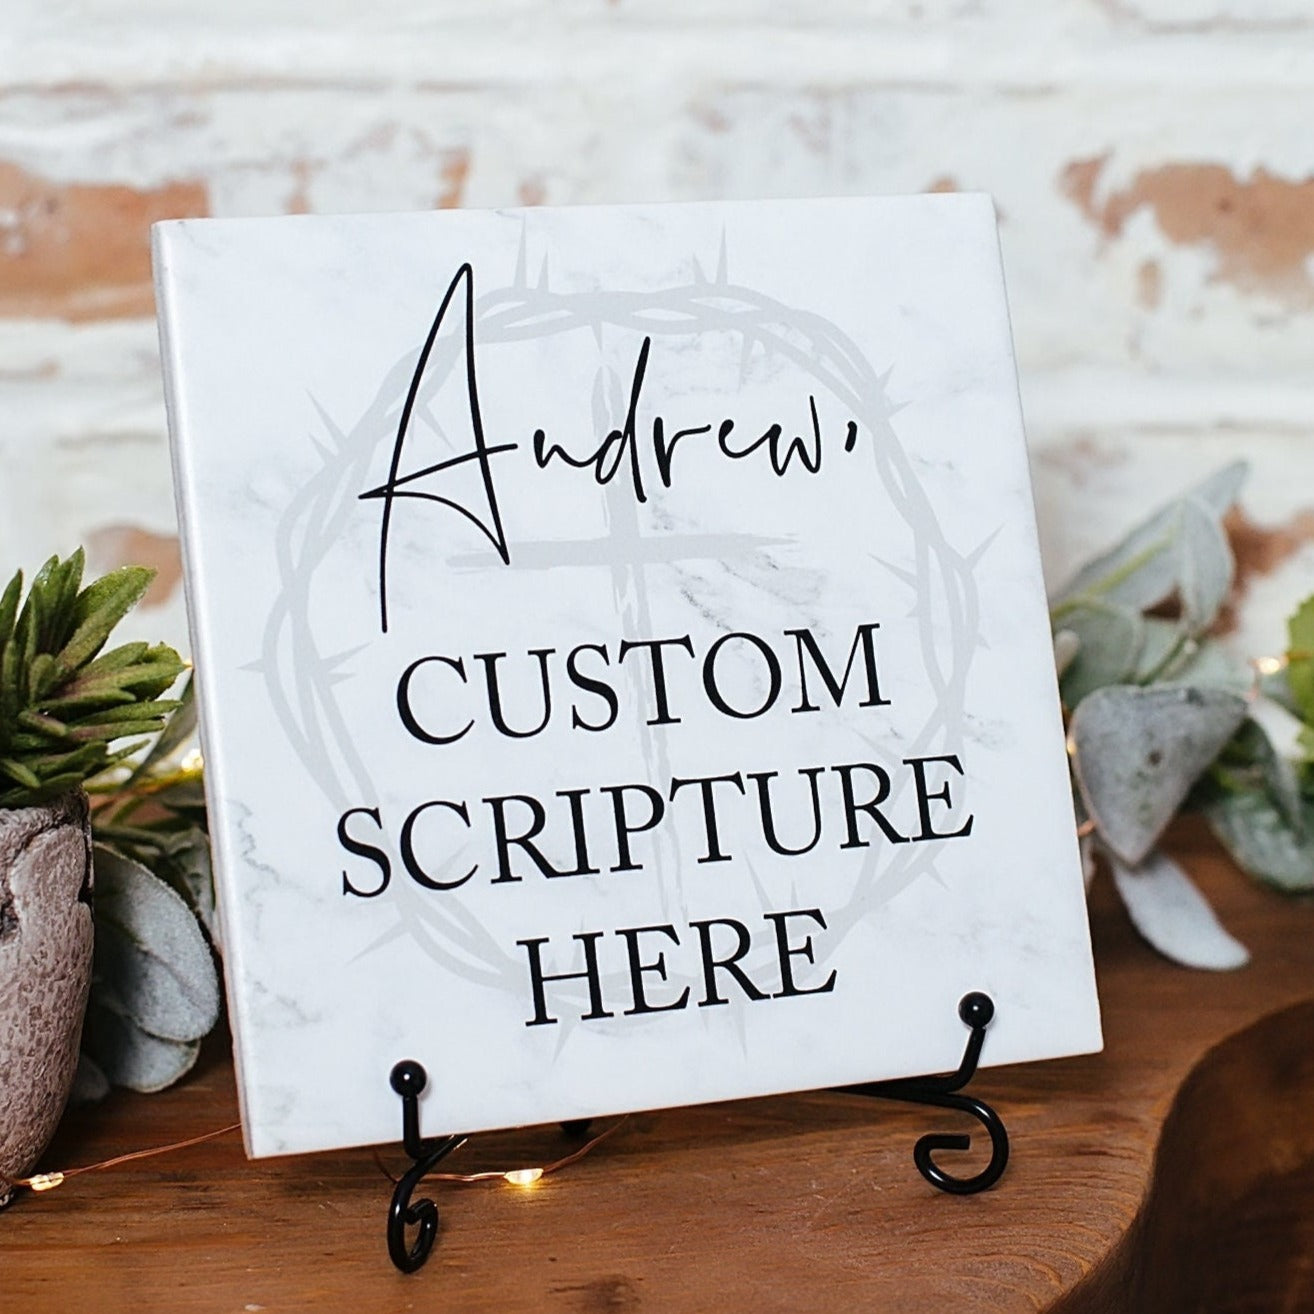 Personalized Custom Bible Verse SCRIPTURE Christian Gifts For Men Teens Boys, Encouraging Sign, Christening Christening Graduation Ideas